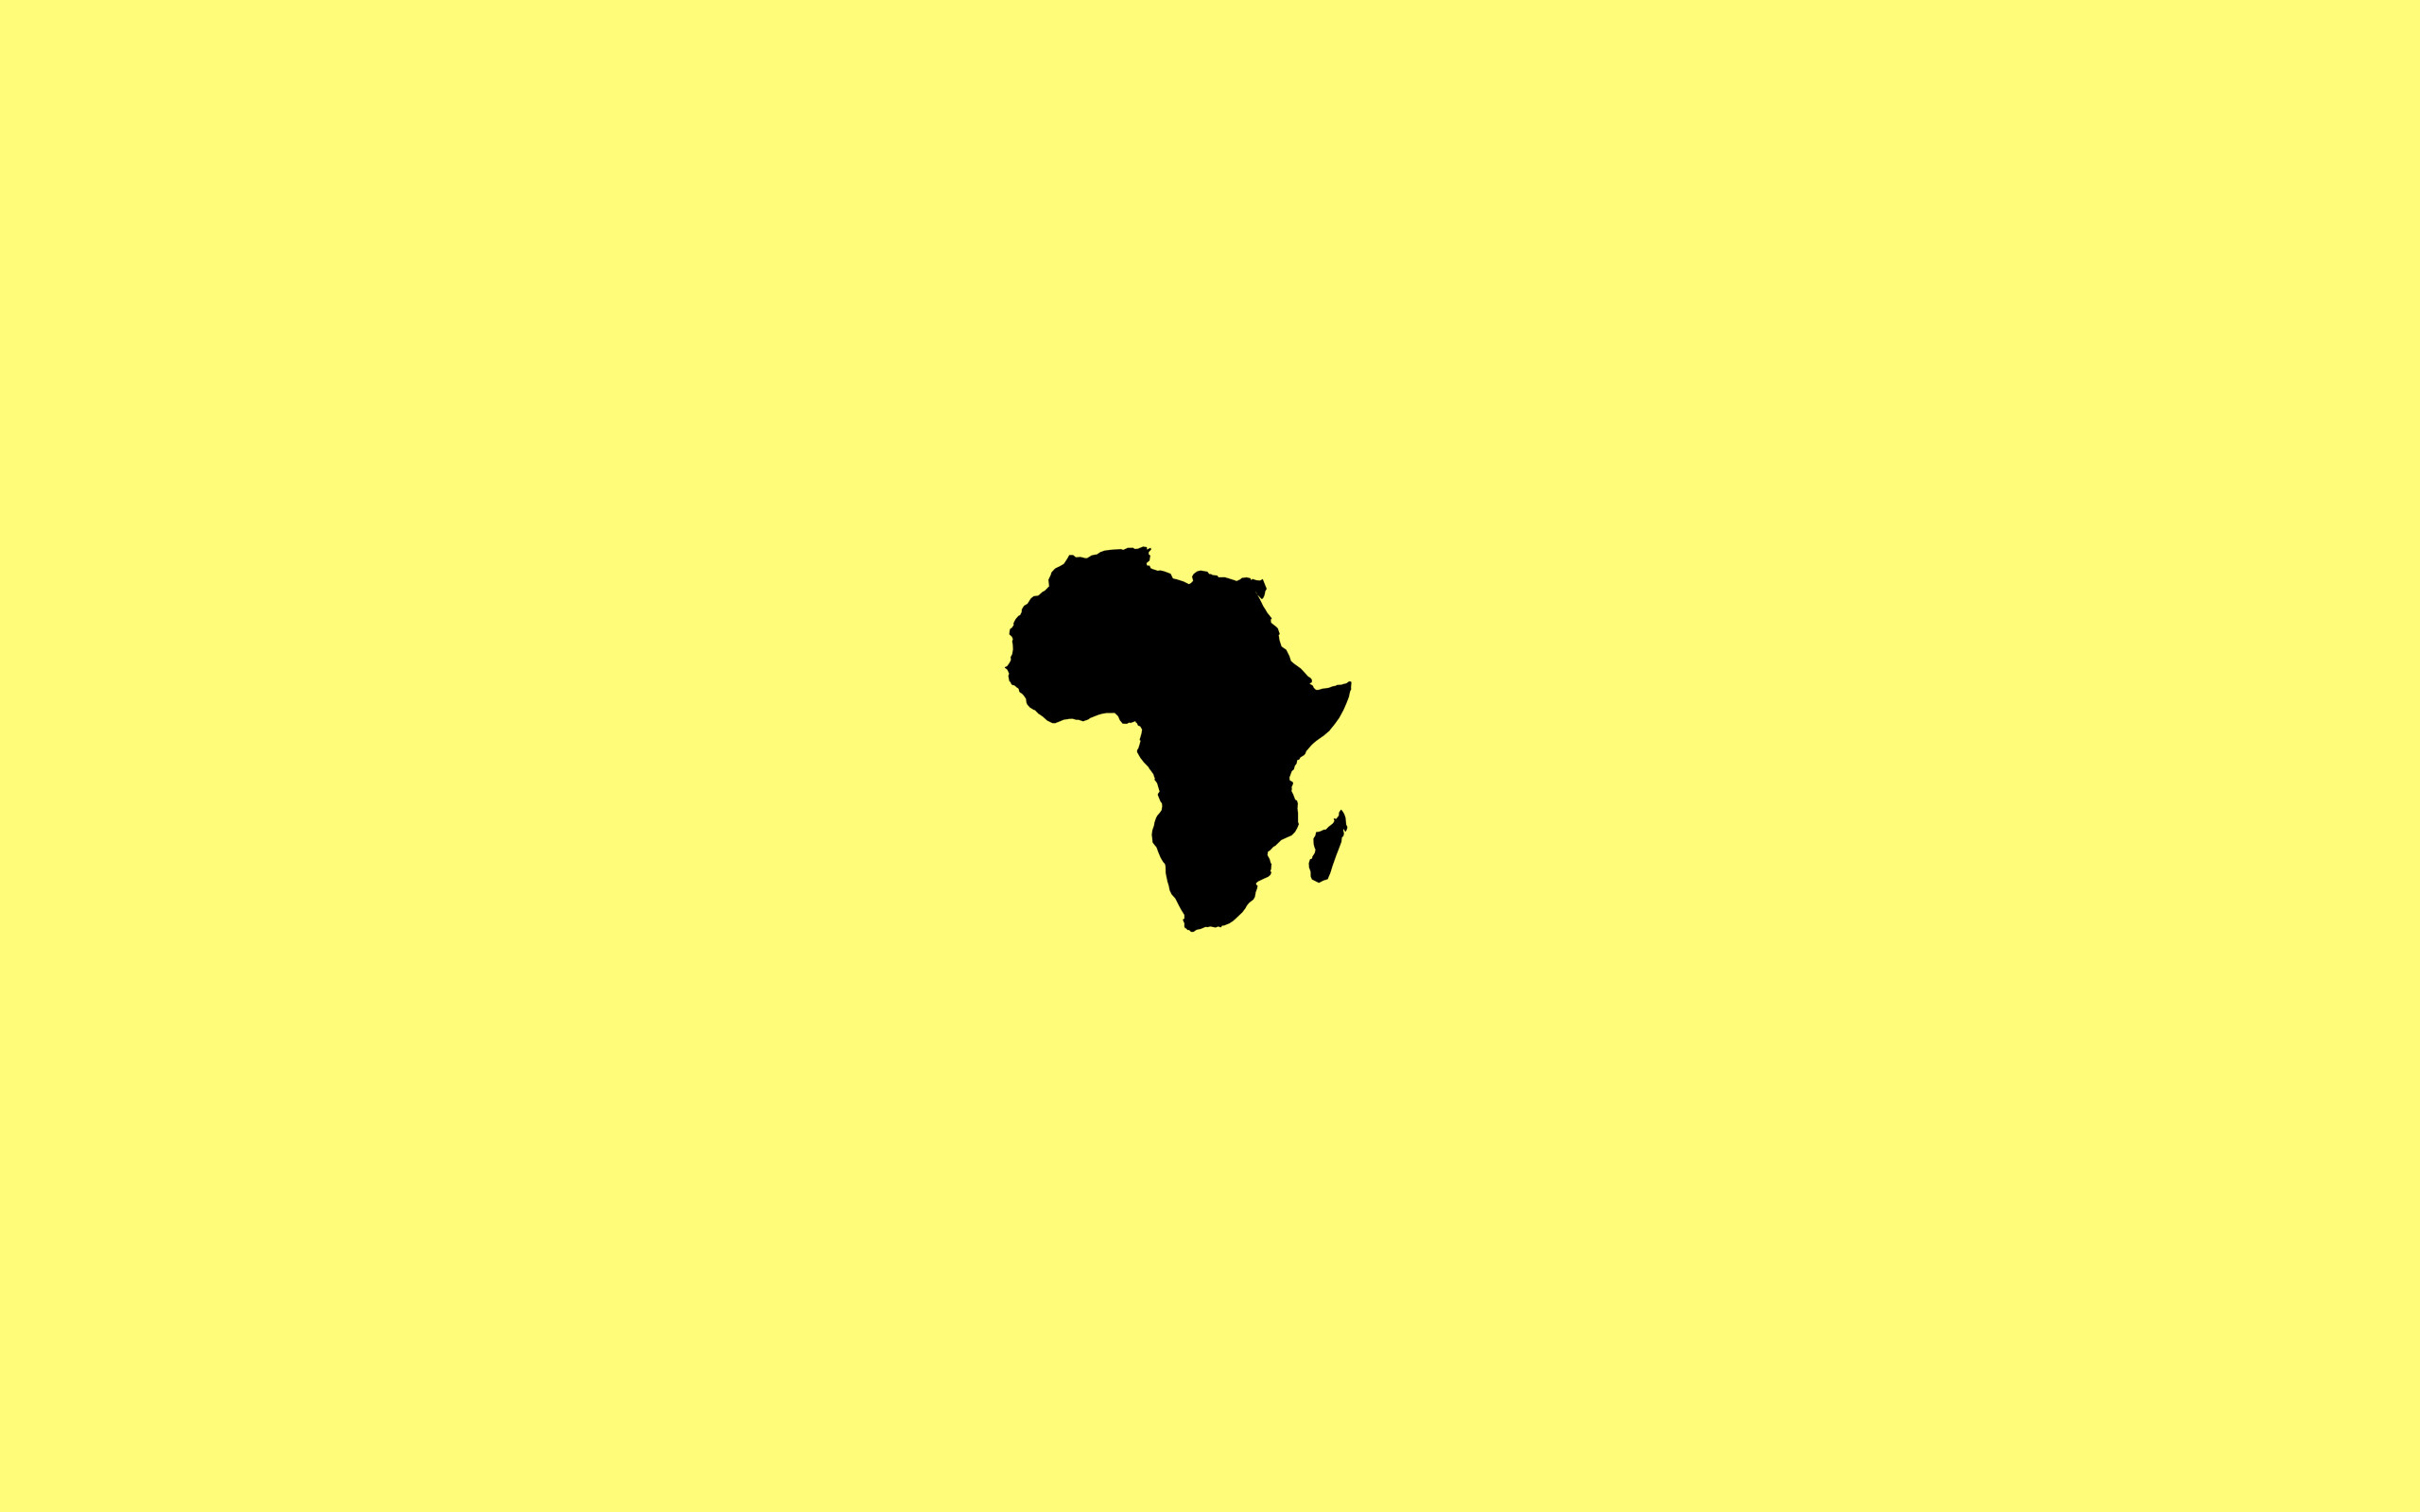 2560x1600 ... wallpapers of the African continent in different colors. Download them  by a right click and “save as”. They are all vector graphics with a  resolution of ...